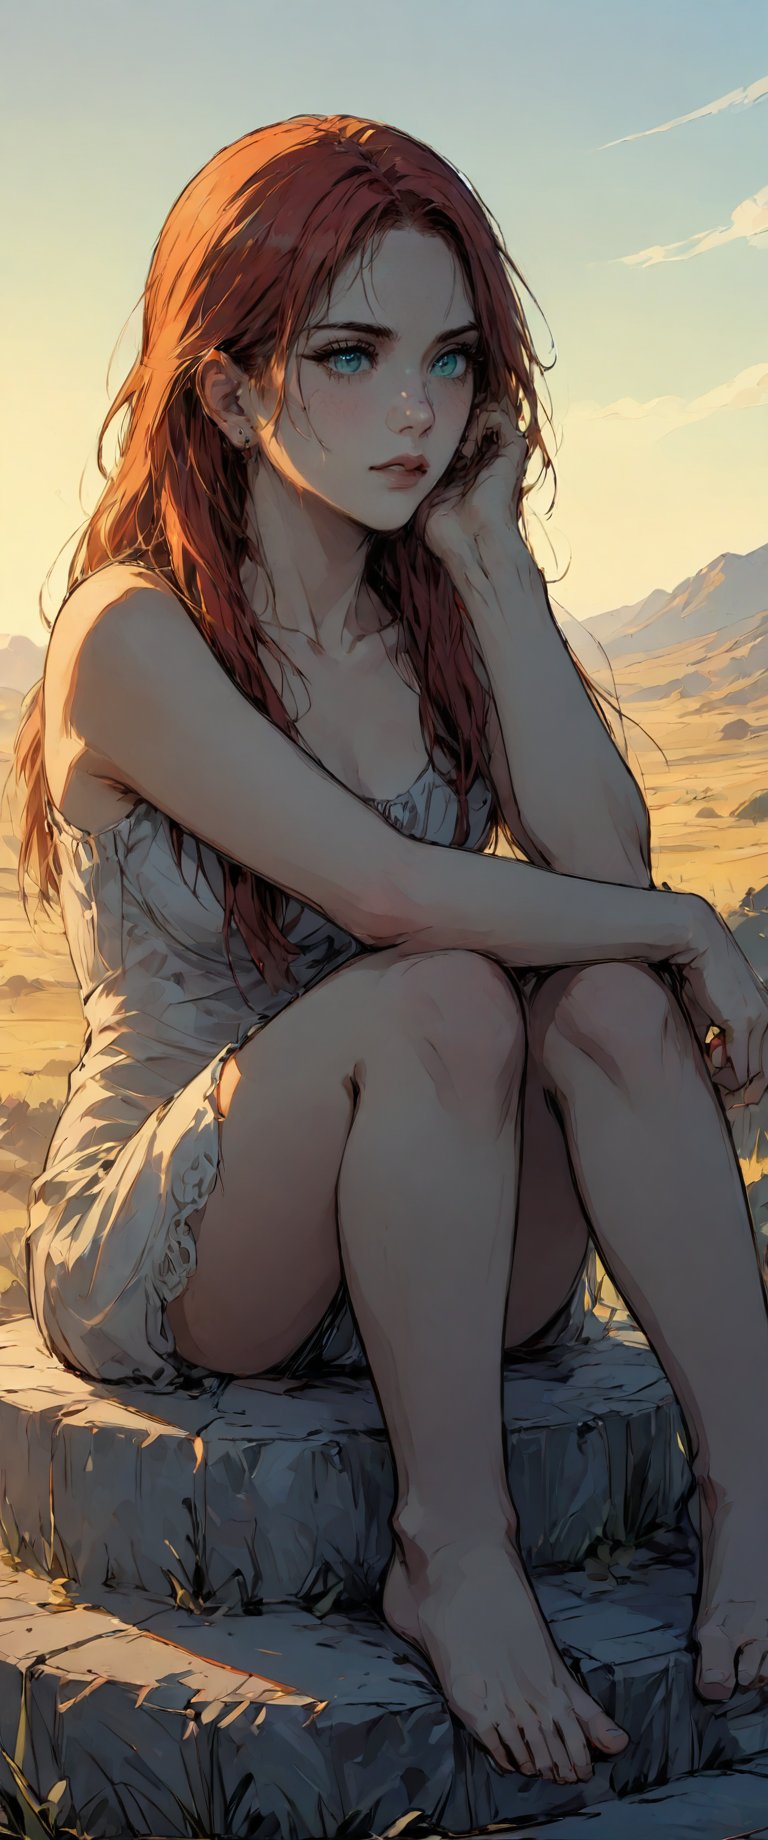 Red Sonja's battle-worn visage is bathed in a soft, golden light as she pauses beside her sword on a worn stone pedestal, the warm glow accentuating the rugged lines of her face. Her piercing green eyes, lost in thought, seem to bore into the dusty landscape before her, the sun-scorched terrain stretching out like an endless expanse of untamed wilderness.